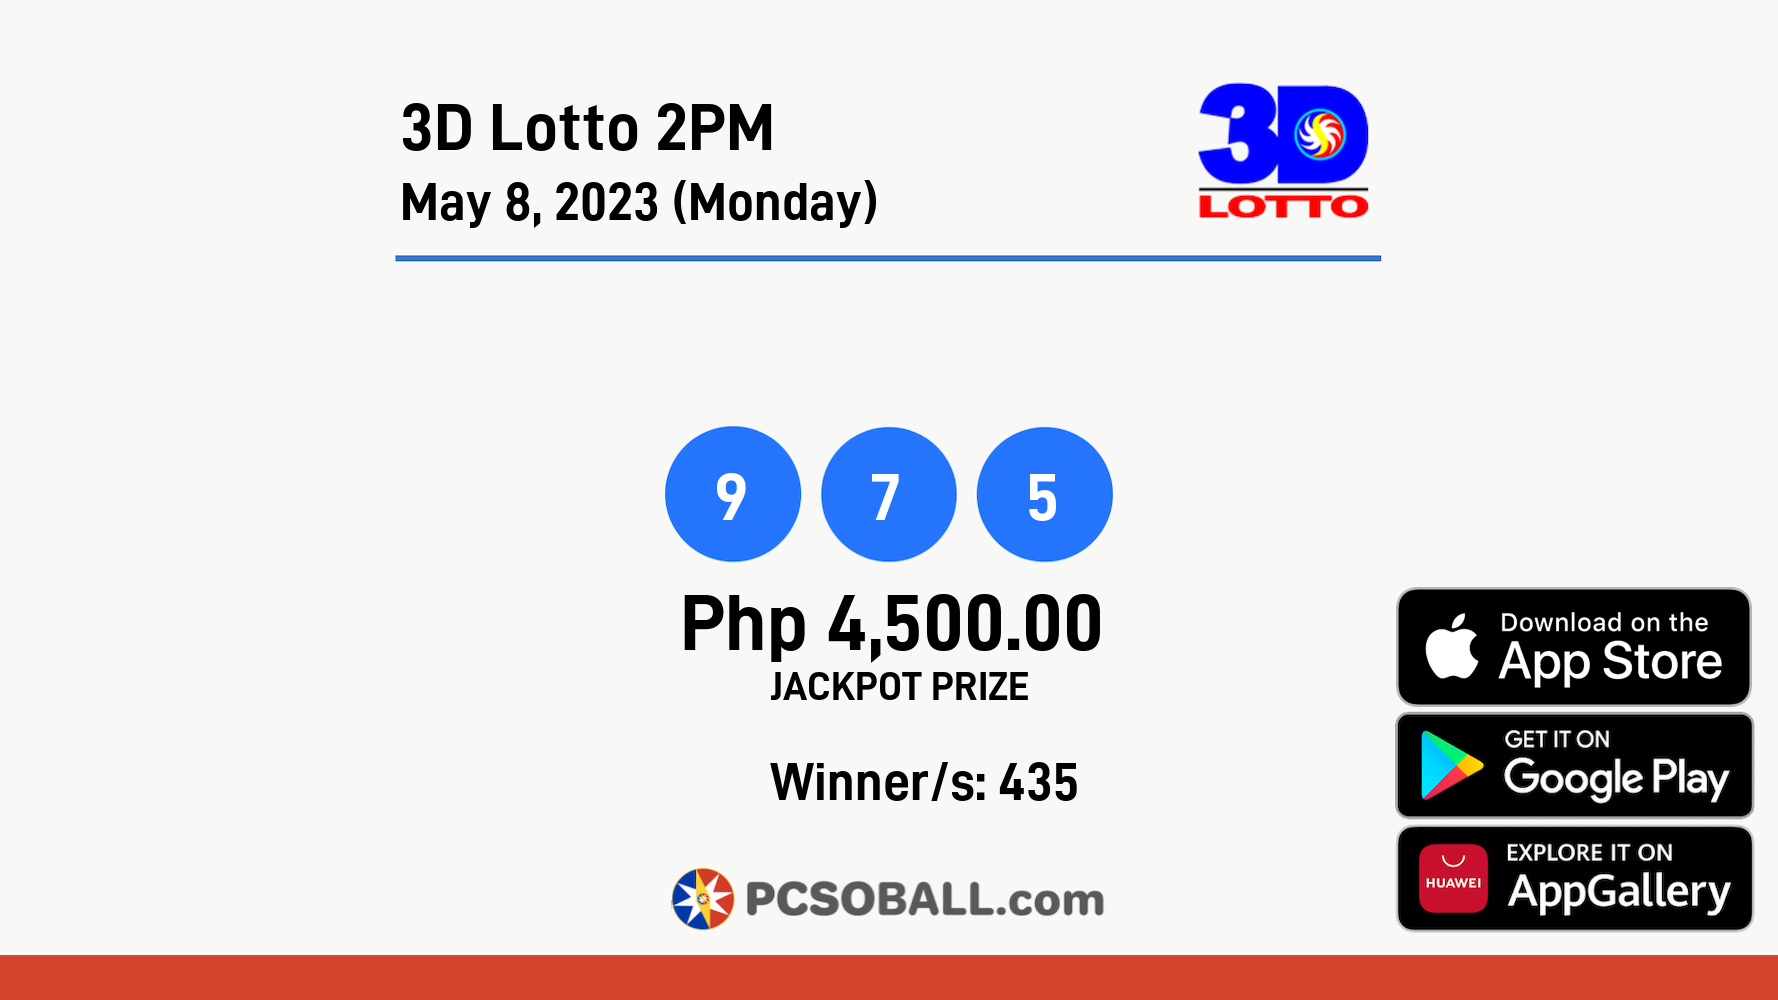 3D Lotto 2PM May 8, 2023 (Monday) Result